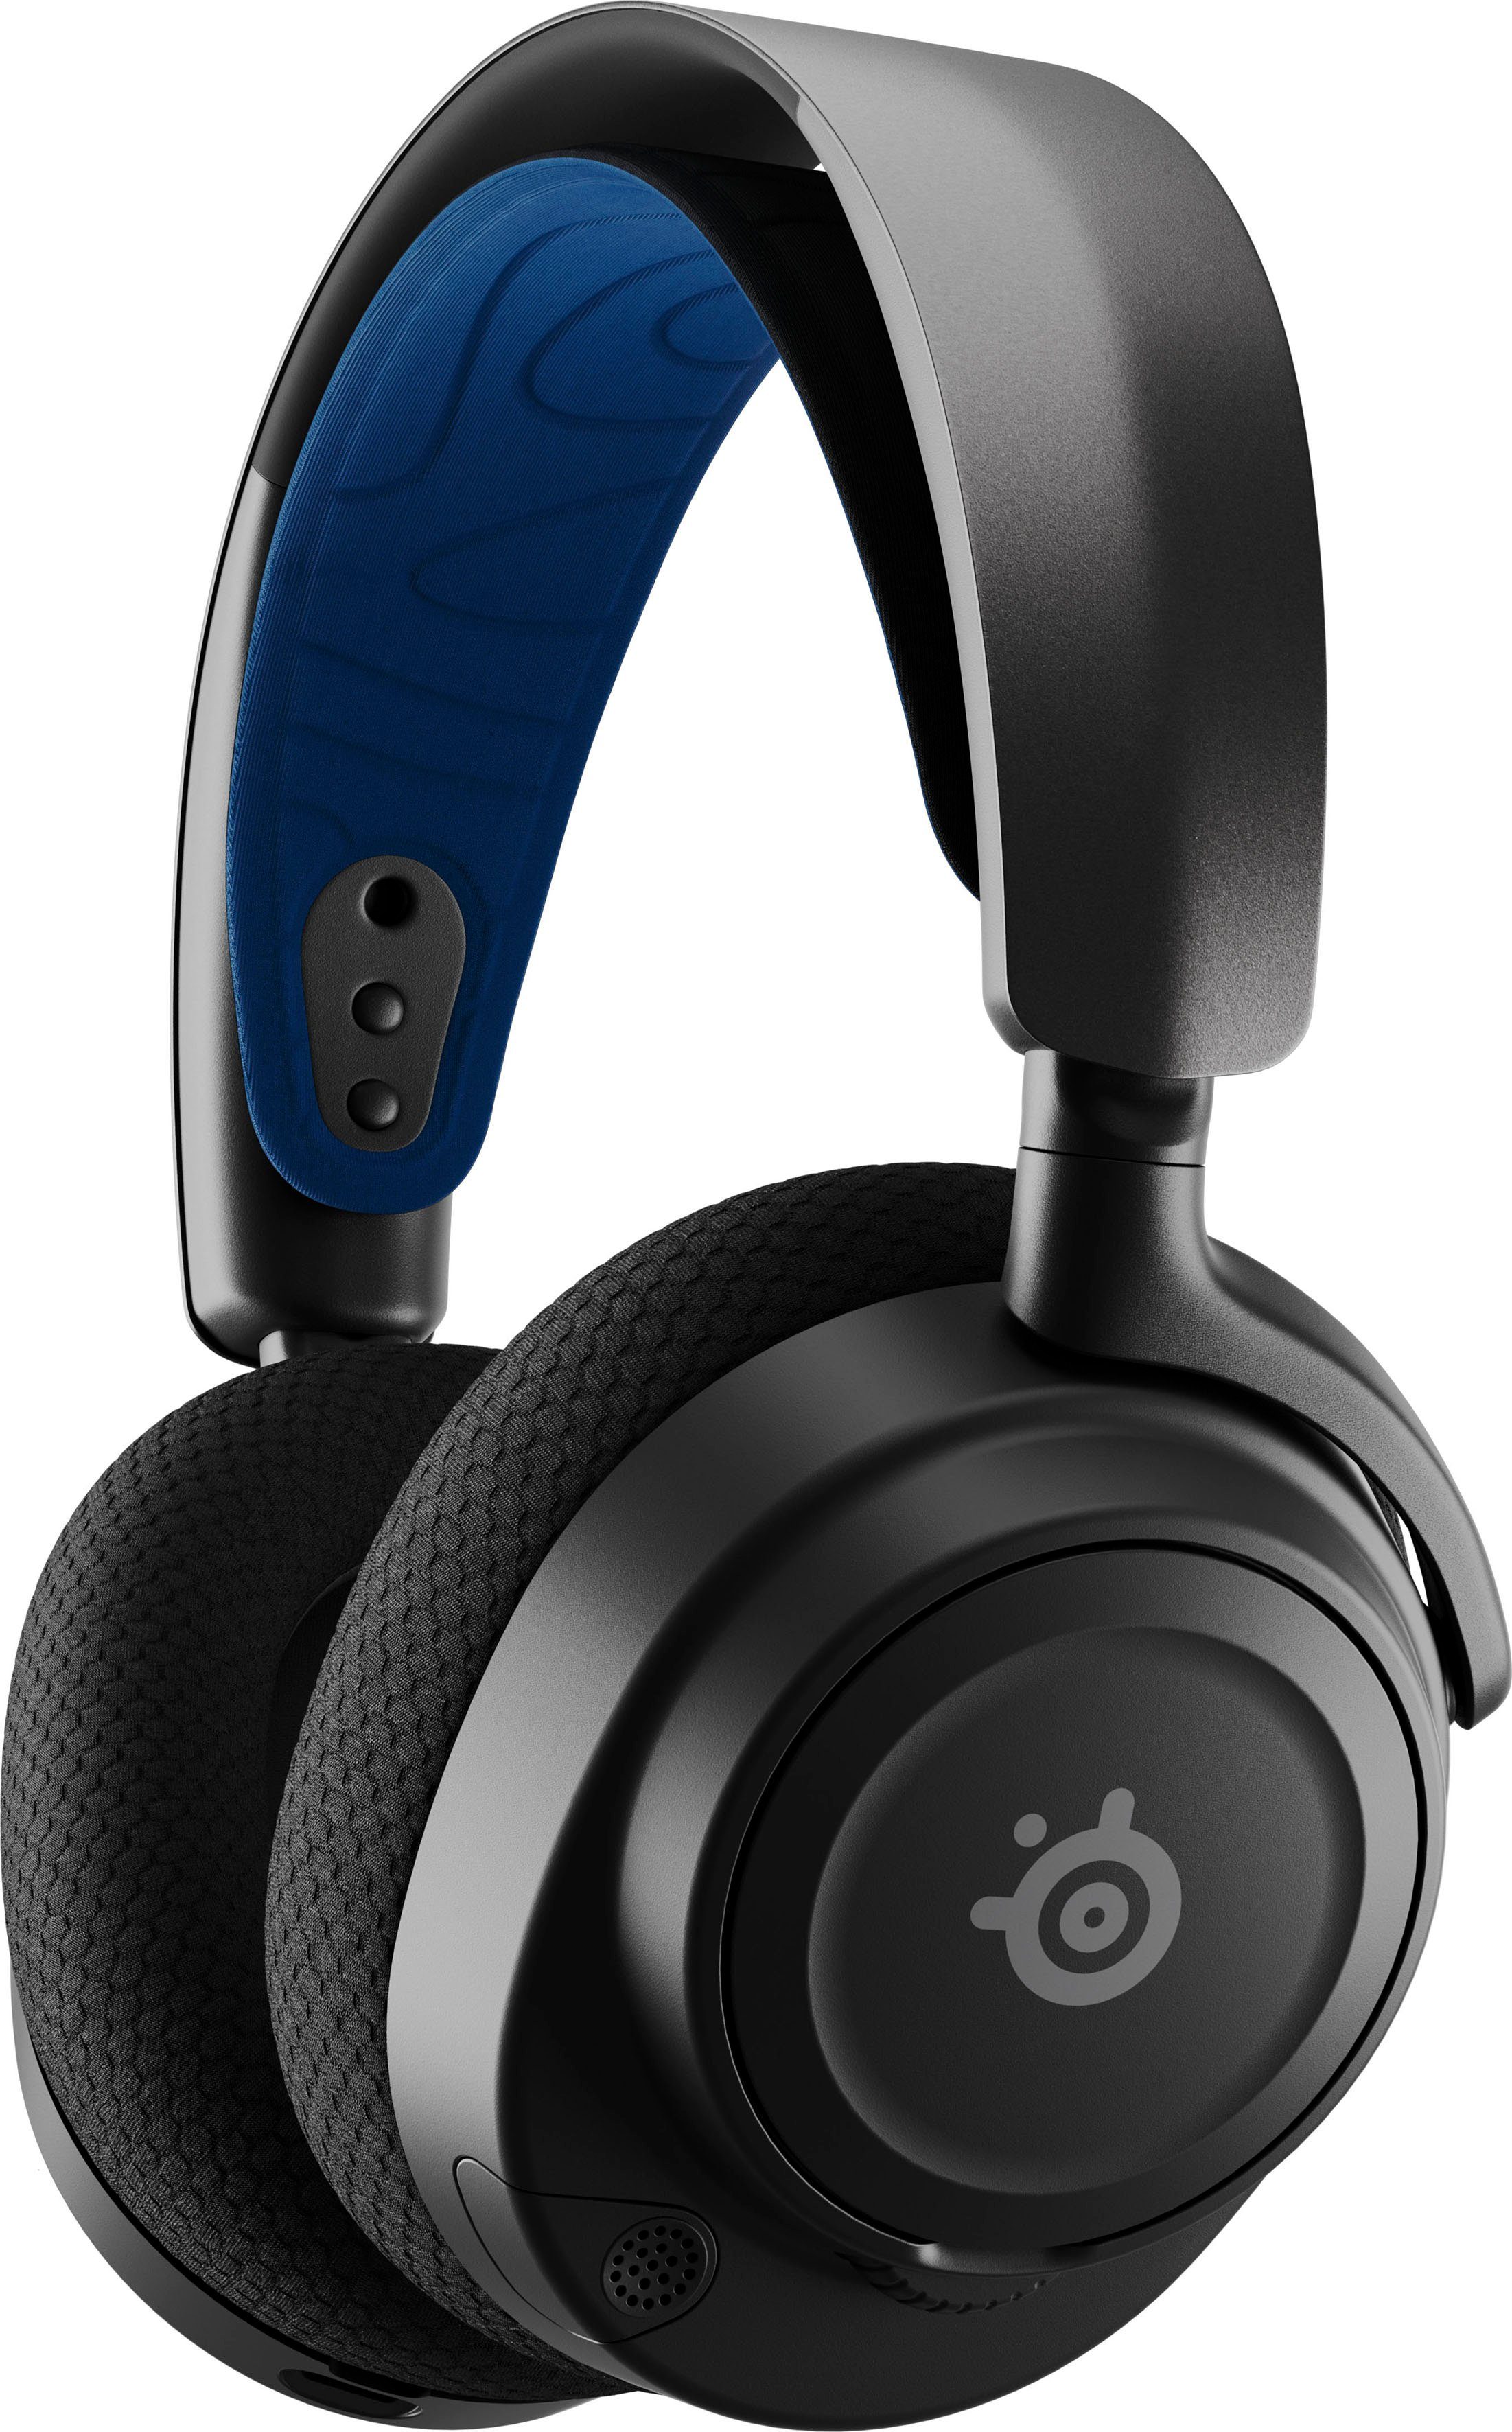 SteelSeries Gaming-Headset Arctis Wireless) (Noise-Cancelling, Nova Bluetooth, 7P